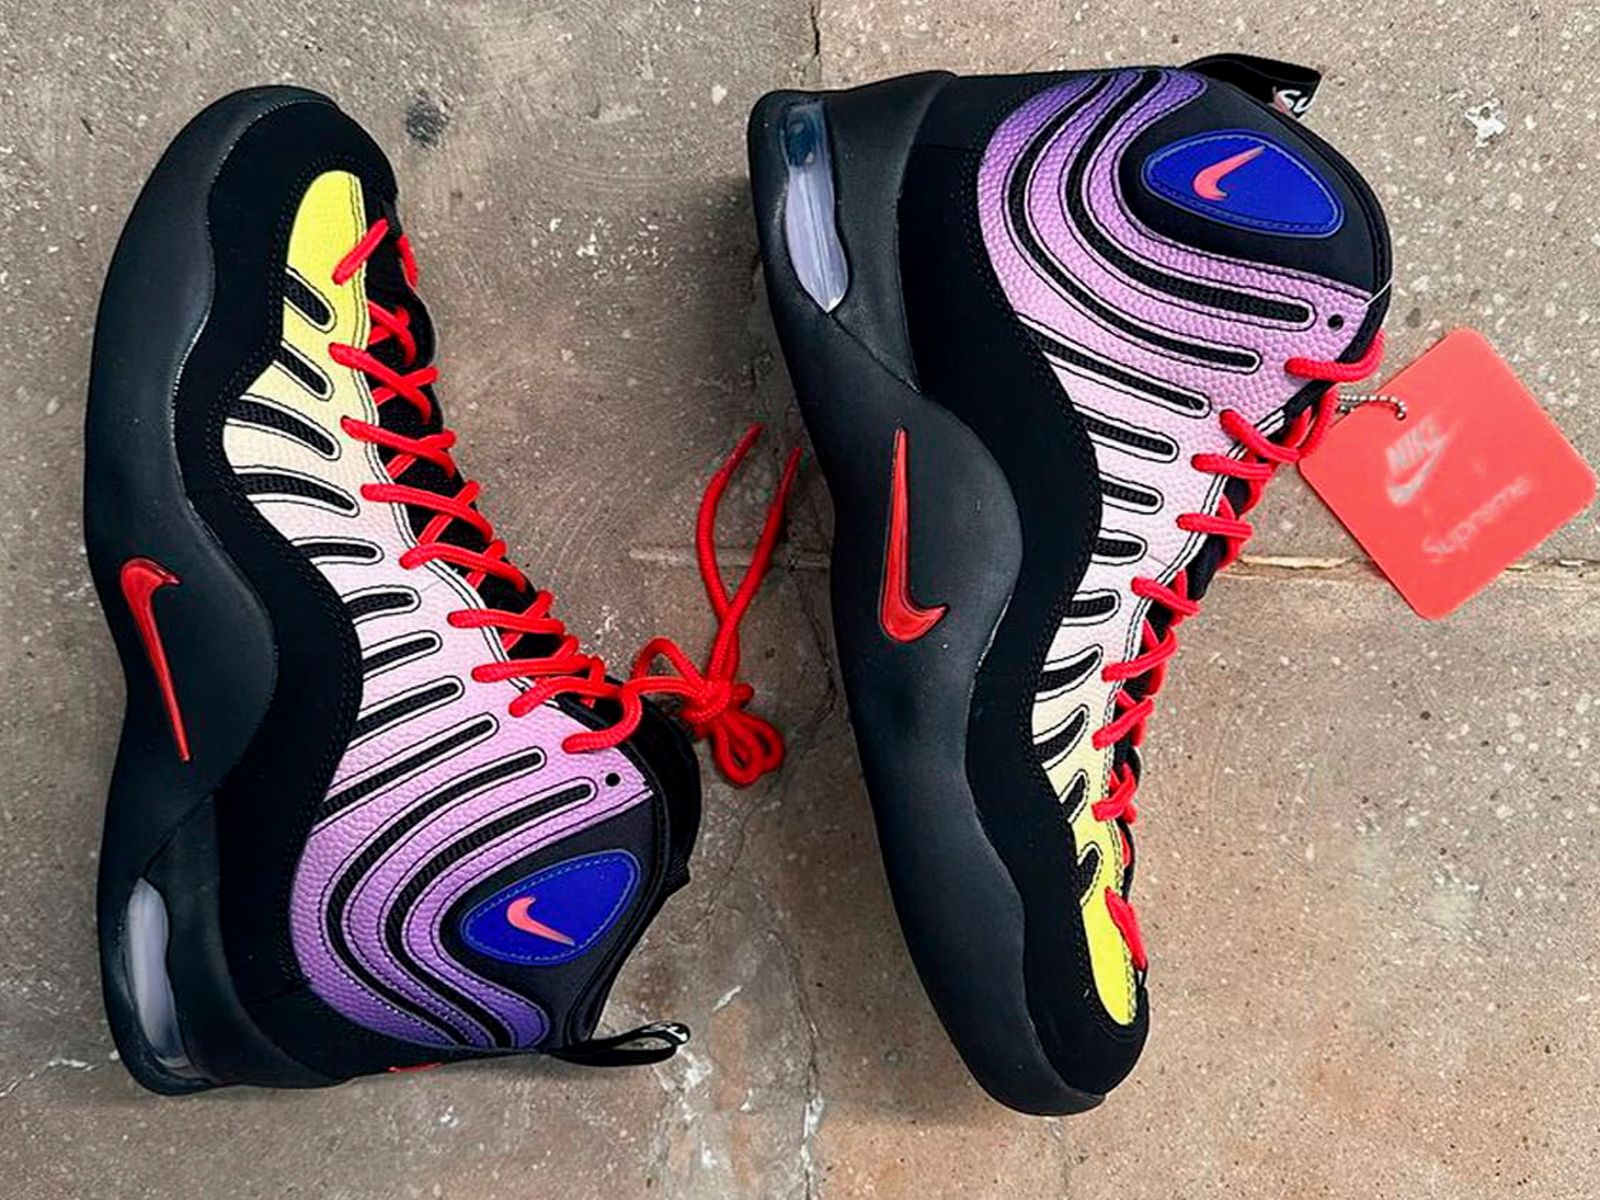 First images of the Supreme x Nike Air Bakin leaked